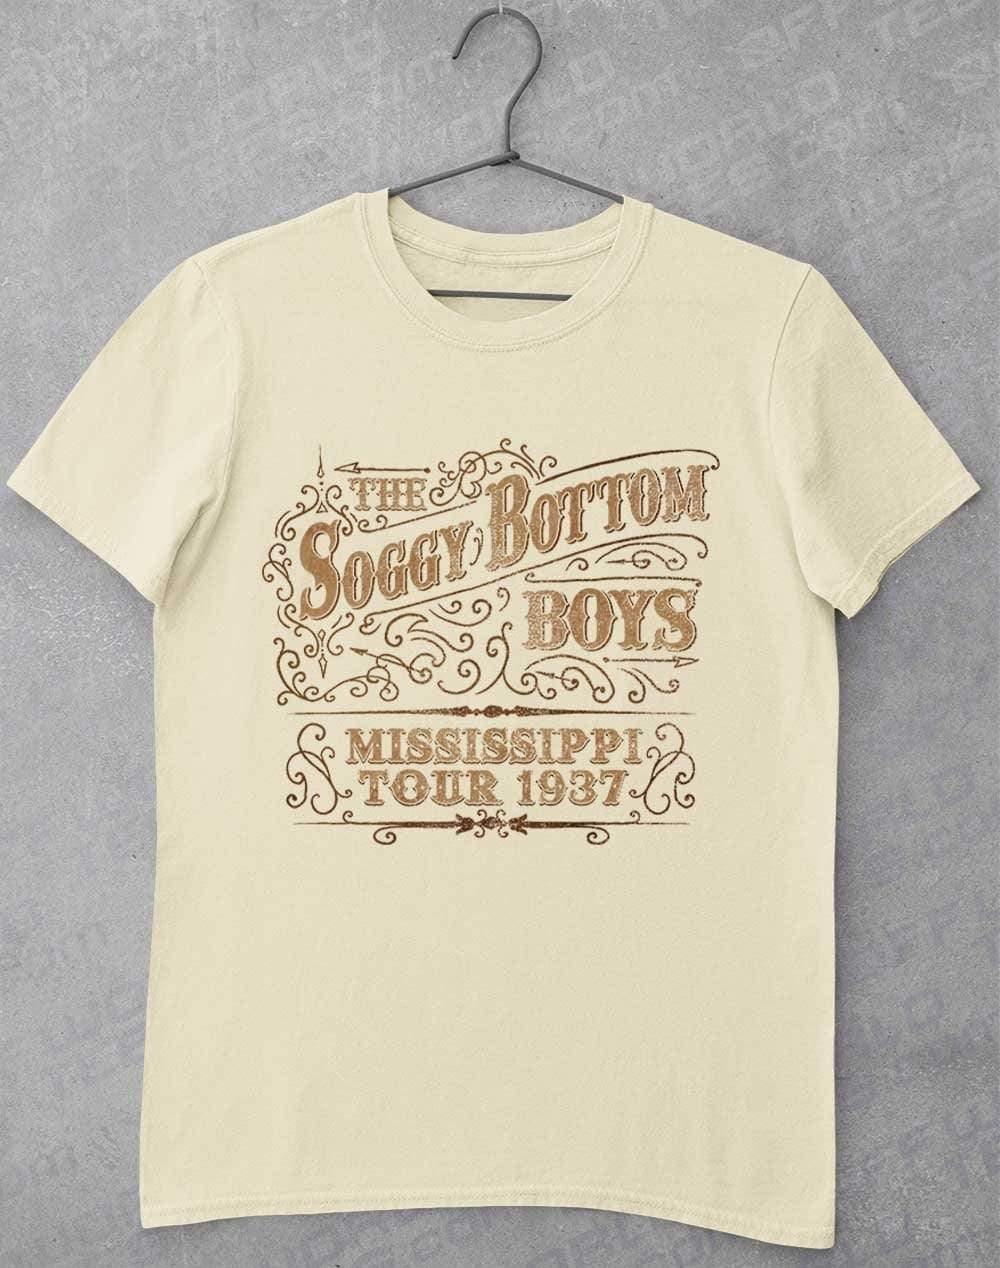 Soggy Bottom Boys Tour 1937 T-Shirt S / Natural  - Off World Tees